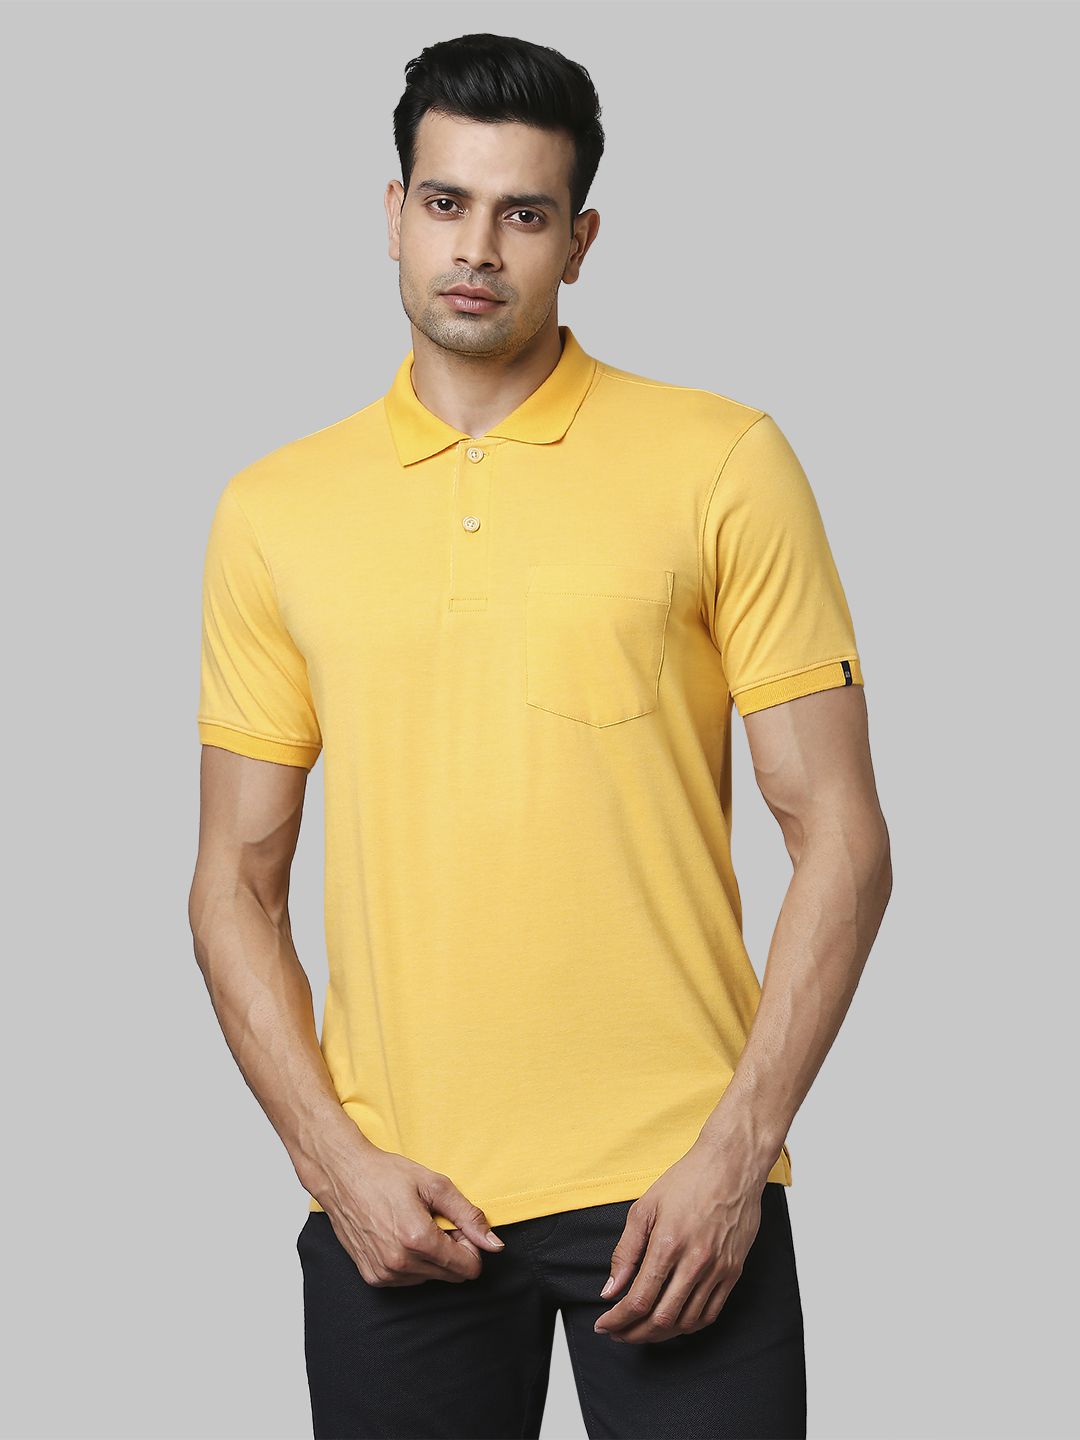     			Raymond Cotton Regular Fit Solid Half Sleeves Men's T-Shirt - Yellow ( Pack of 1 )